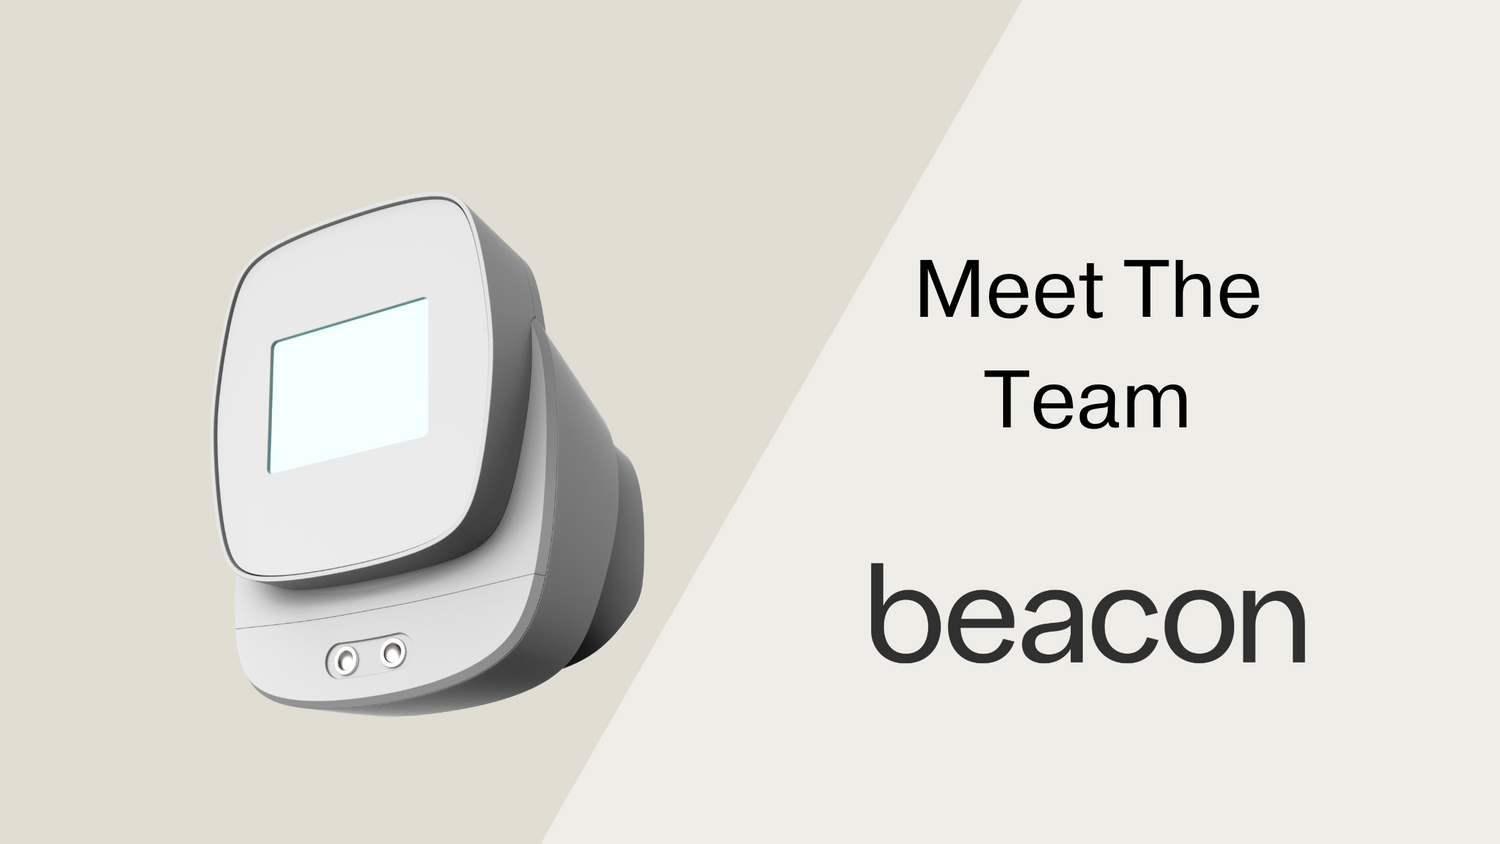 Image of Beacon and Meet the Team